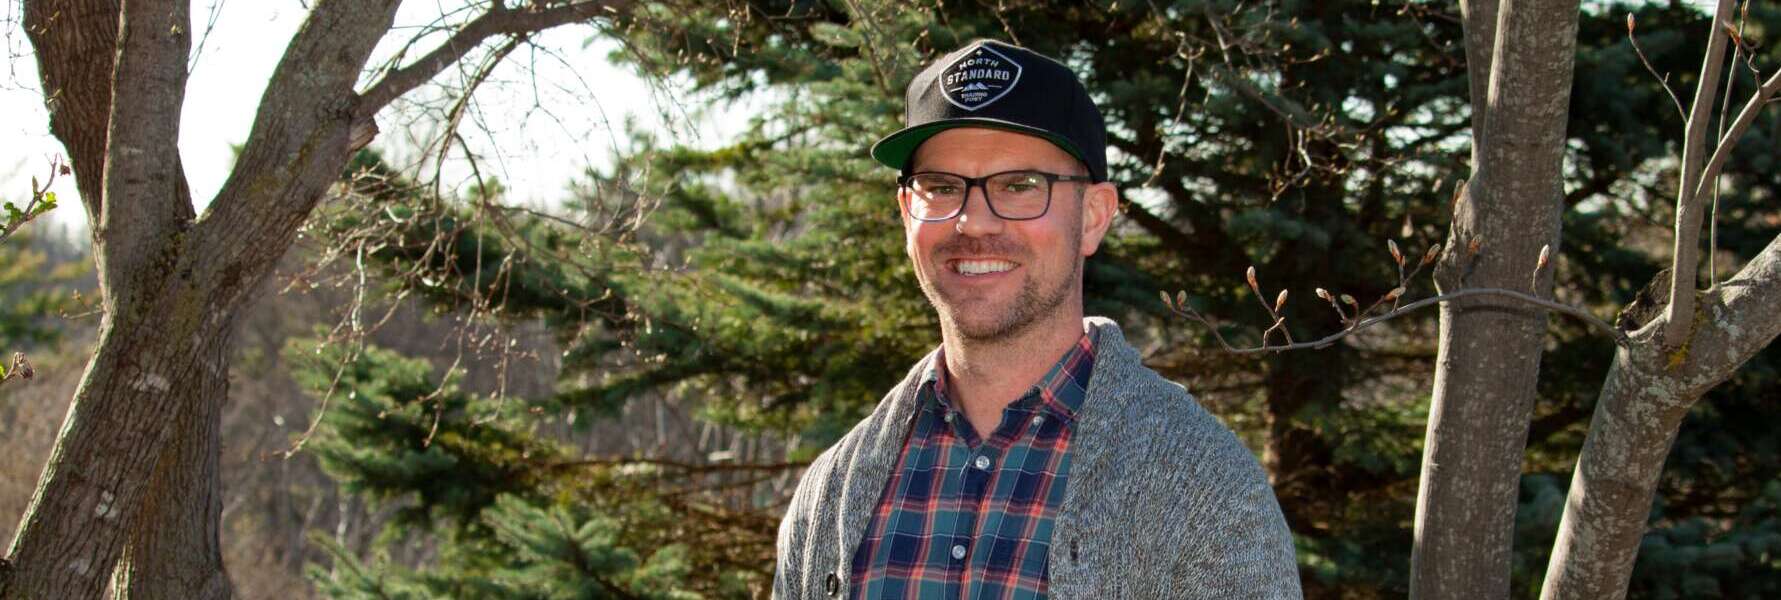 A person stands in front of evergreen trees, facing the camera, smiling, wearing a black baseball hat, black-framed glasses, a plaid shirt and a grey sweater.